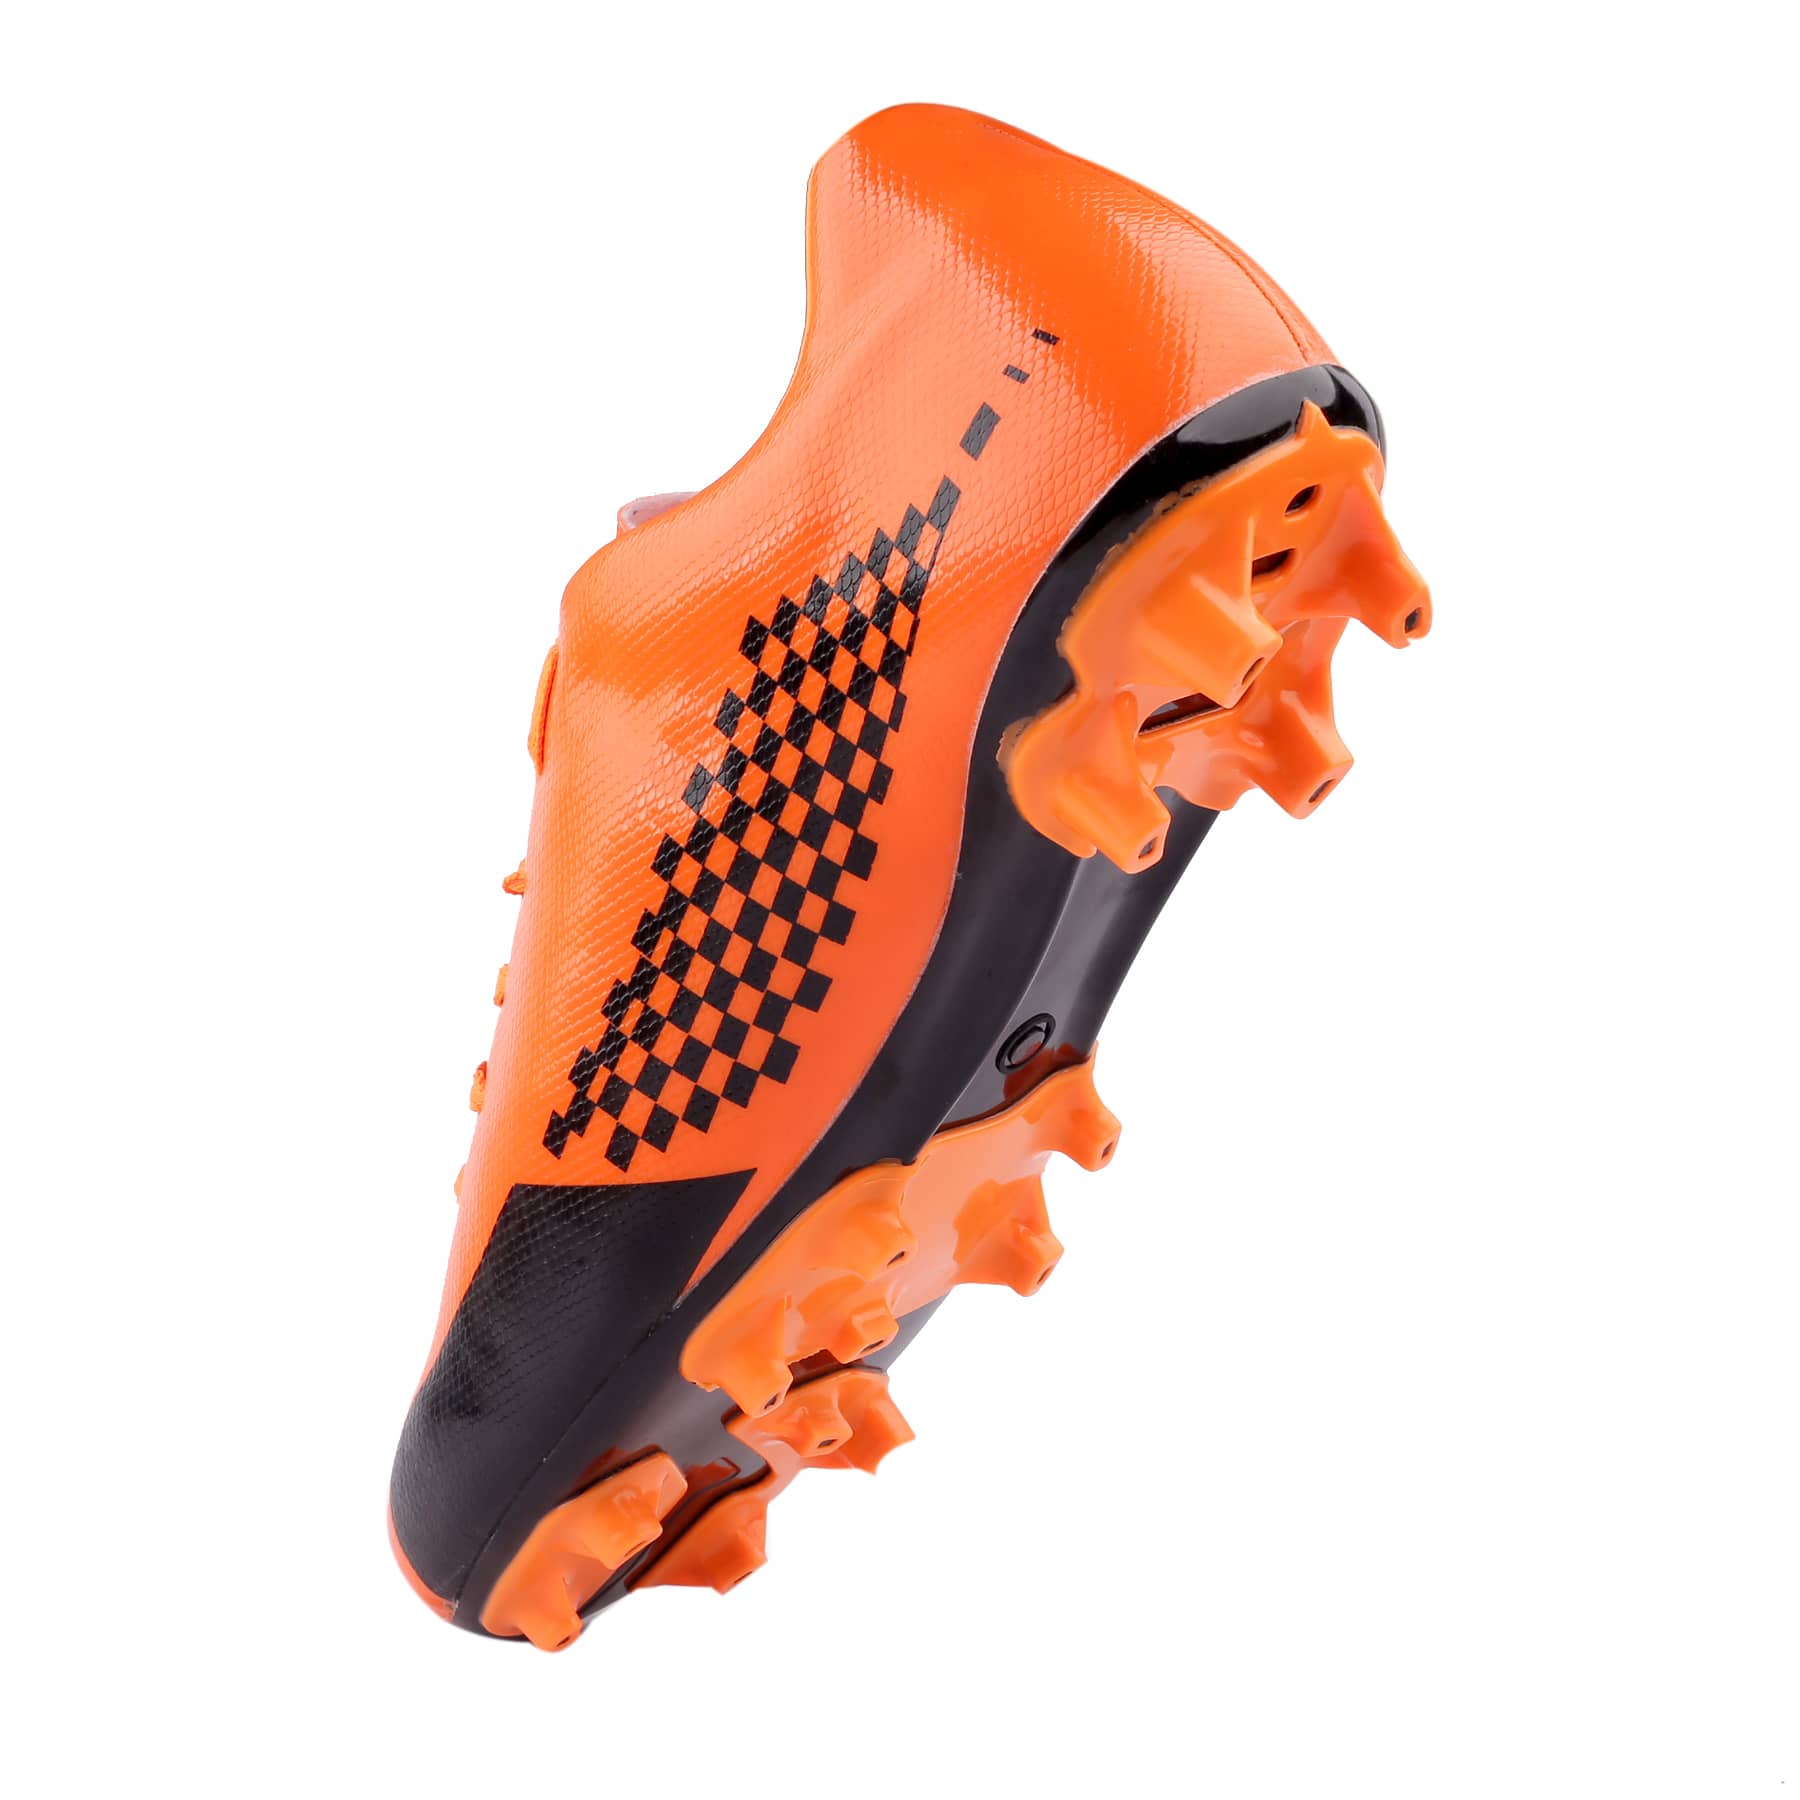 Bacca Bucci Orange Onslaught ZX380: High-Performance Outdoor Soccer Cleats with Superior Traction, Durable Synthetic Upper, and Agile Stud Configuration for Precision Play